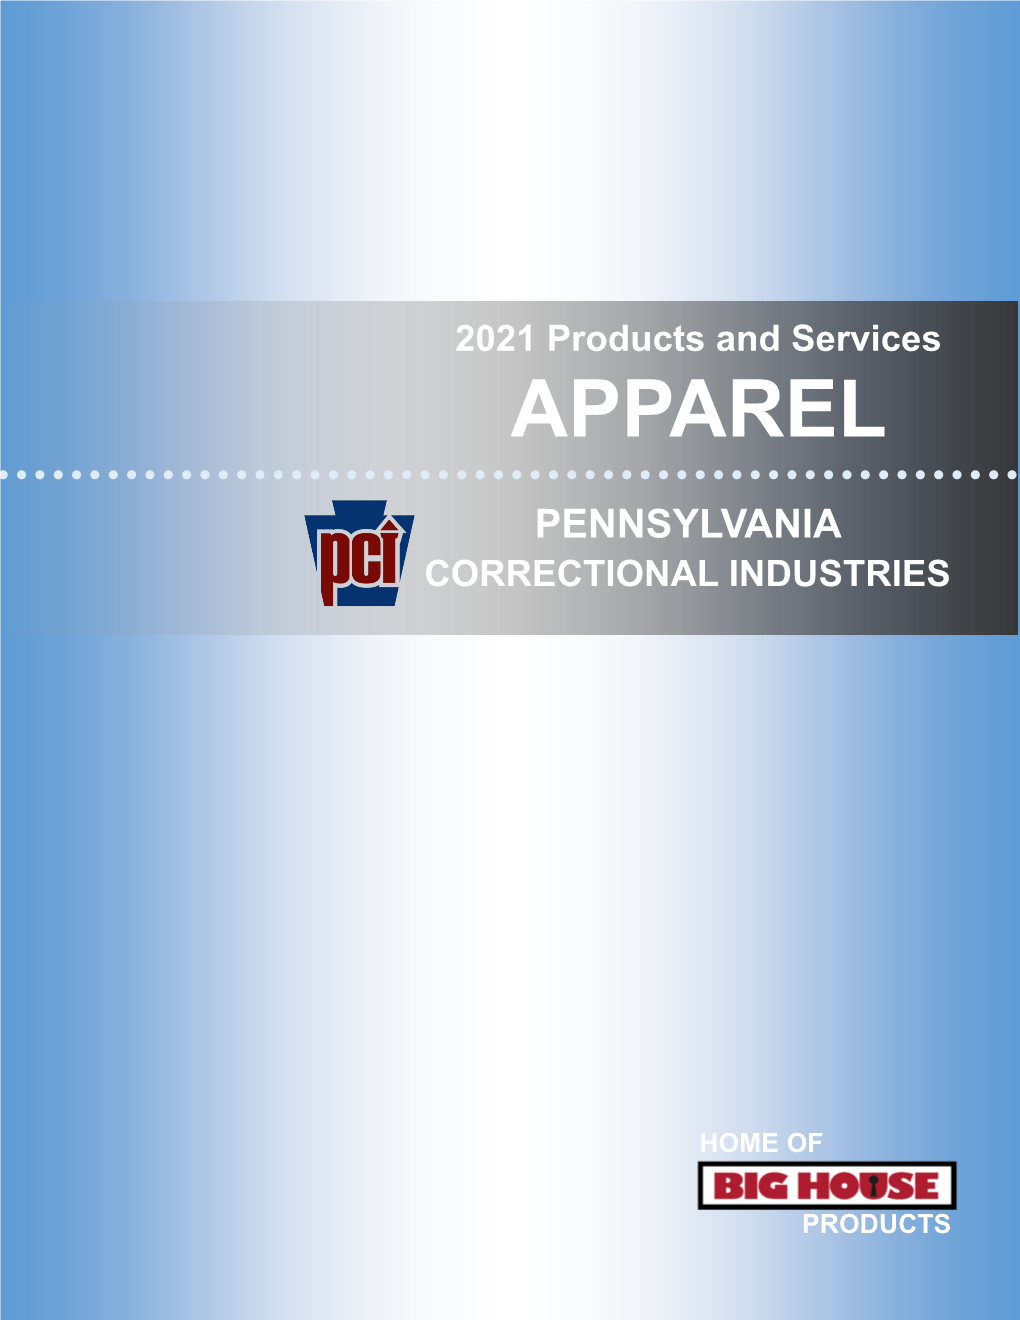 2021 Products and Services APPAREL